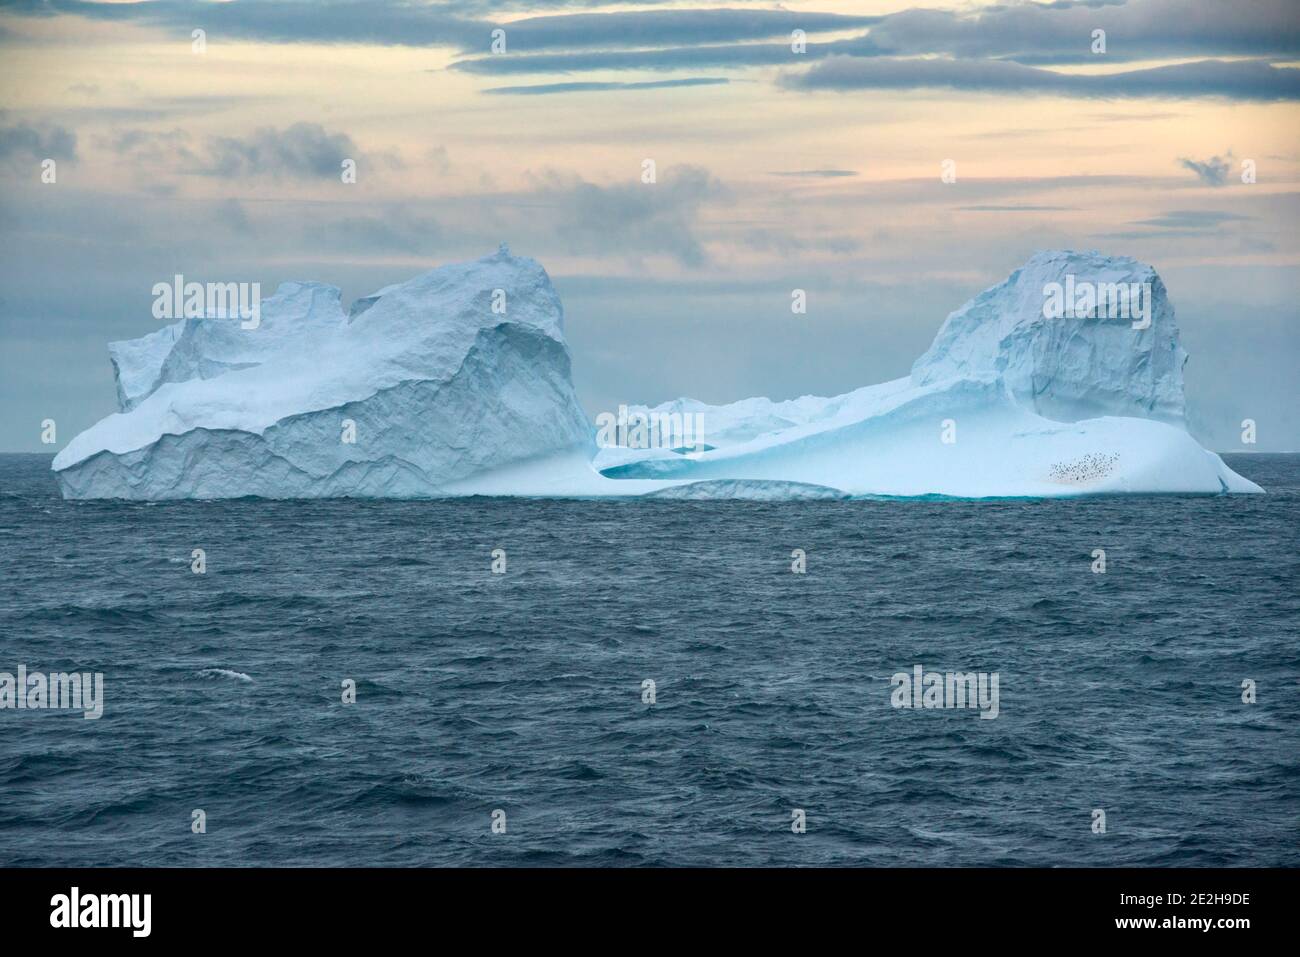 Floating Iceberg With A Colony Of Gentoo Penguins At Sunset In Bransfield Strait Near The Northern Tip Of The Antarctic Peninsula Stock Photo